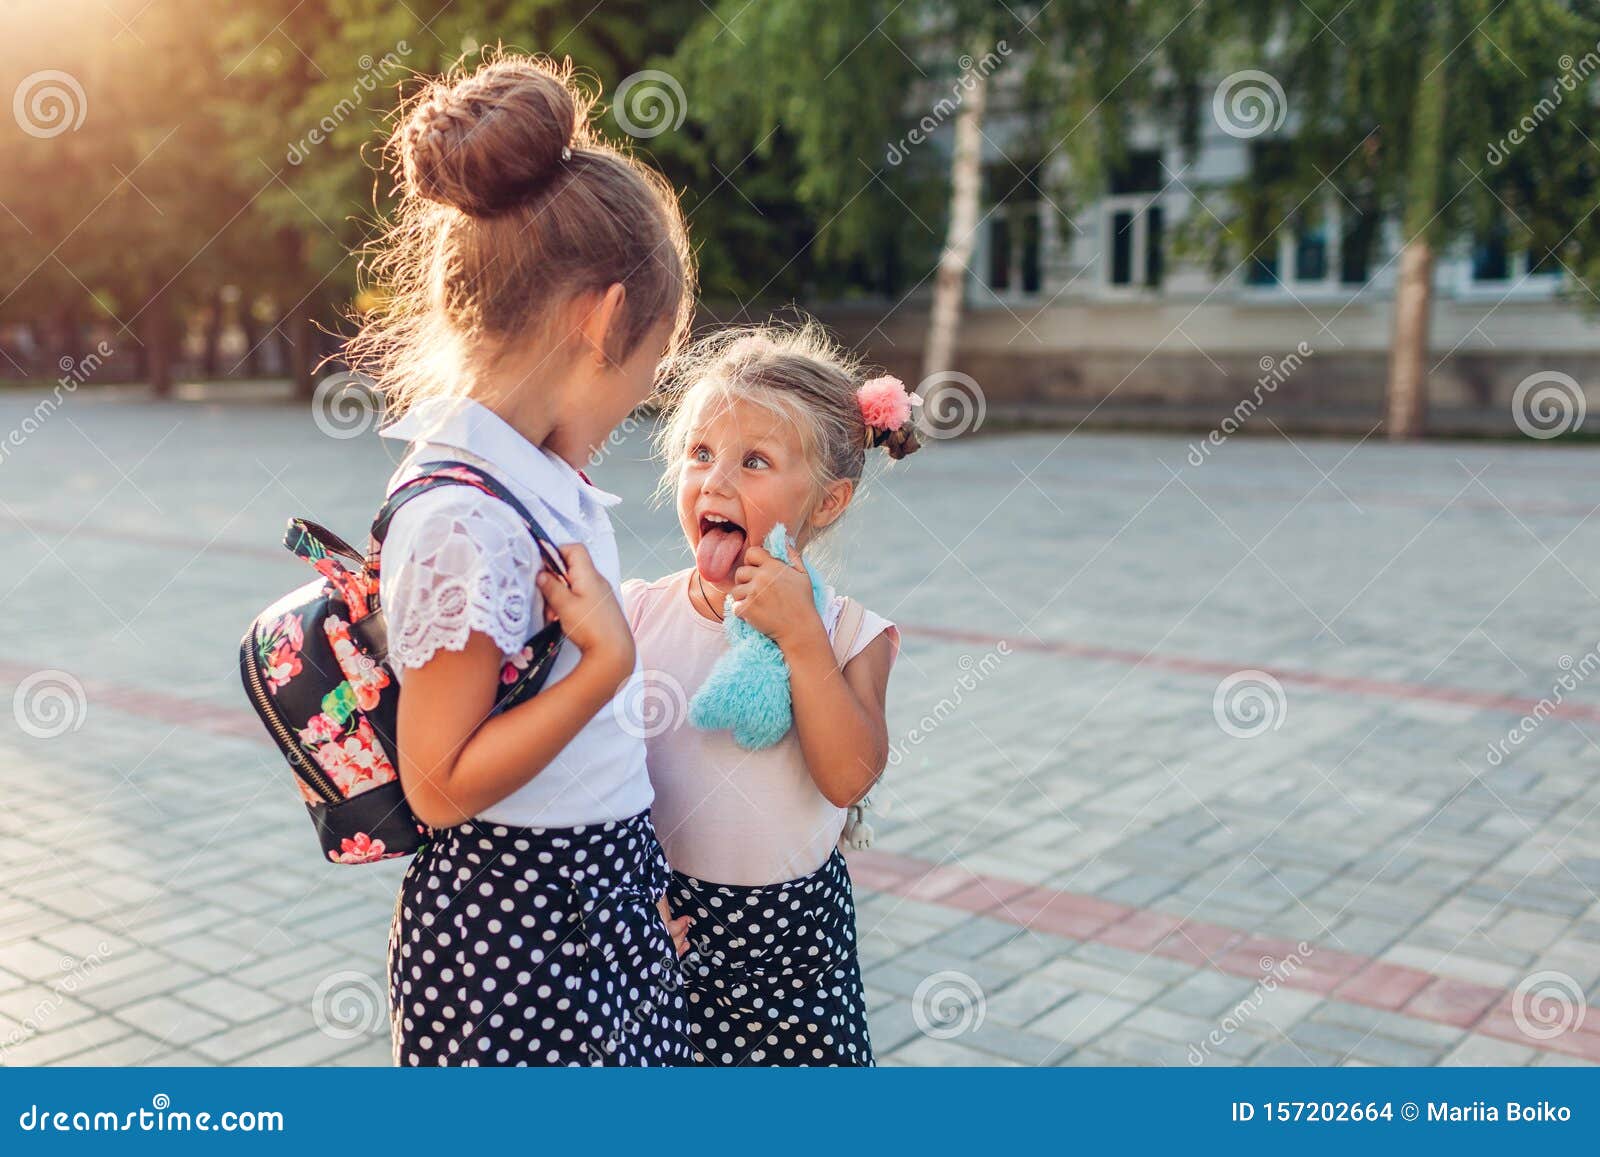 Kids with chalk stock photo. Image of little, healthy 